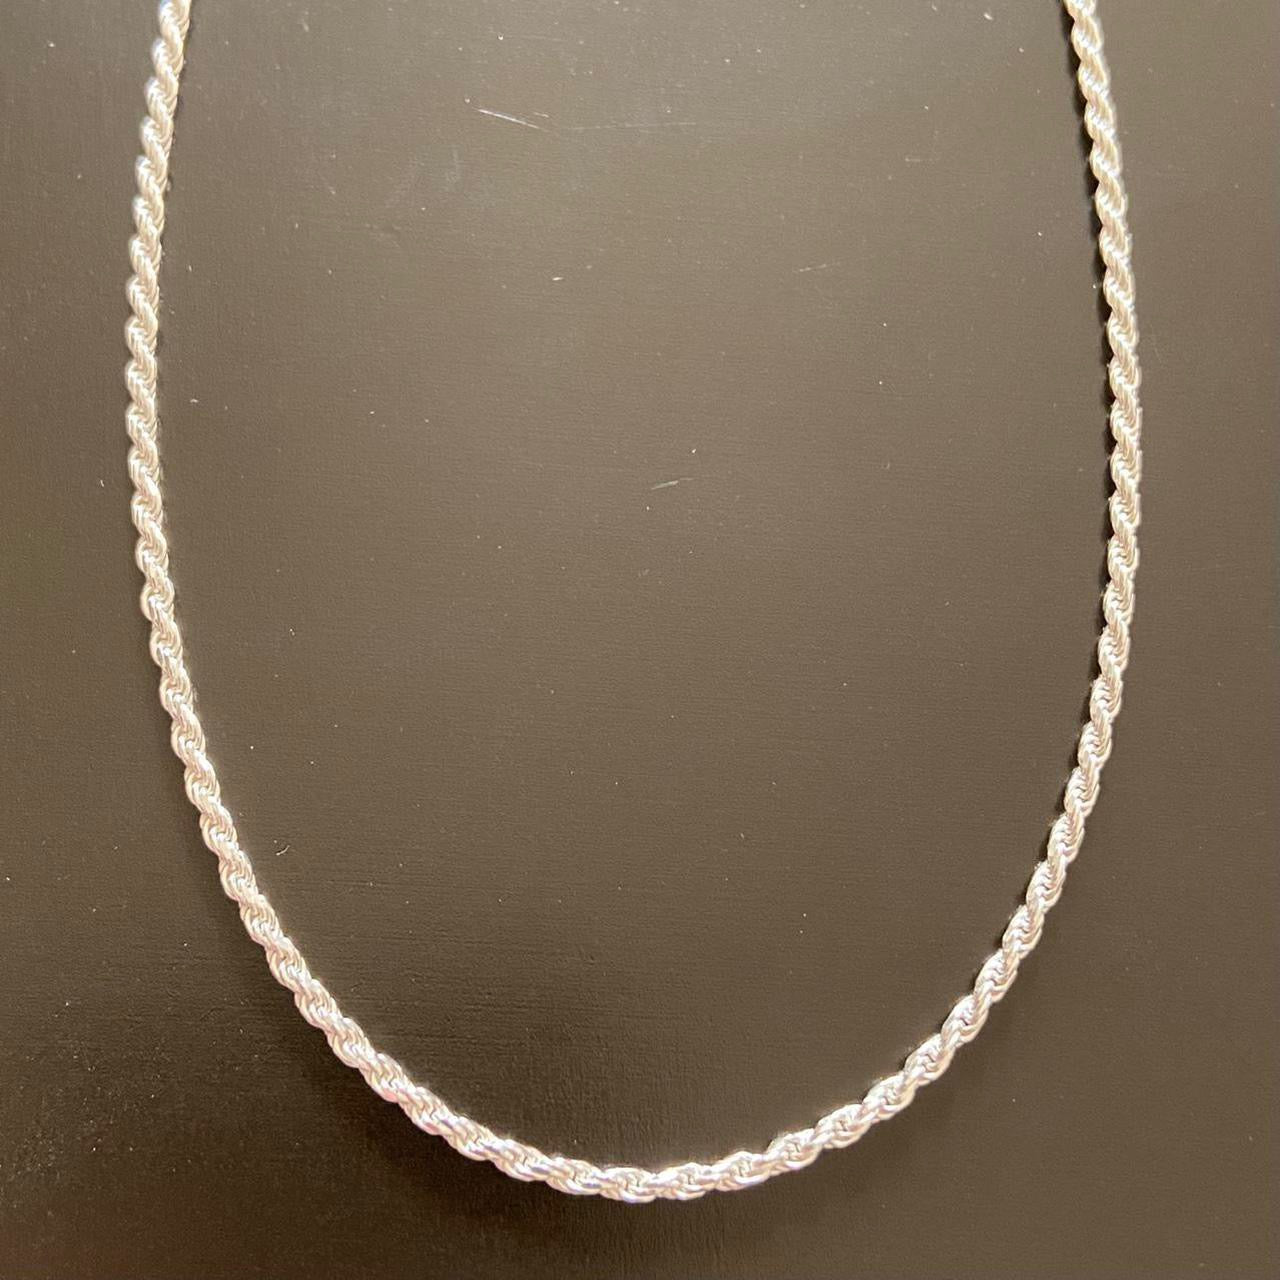 Solid Silver Rope Chain 18in 2mm